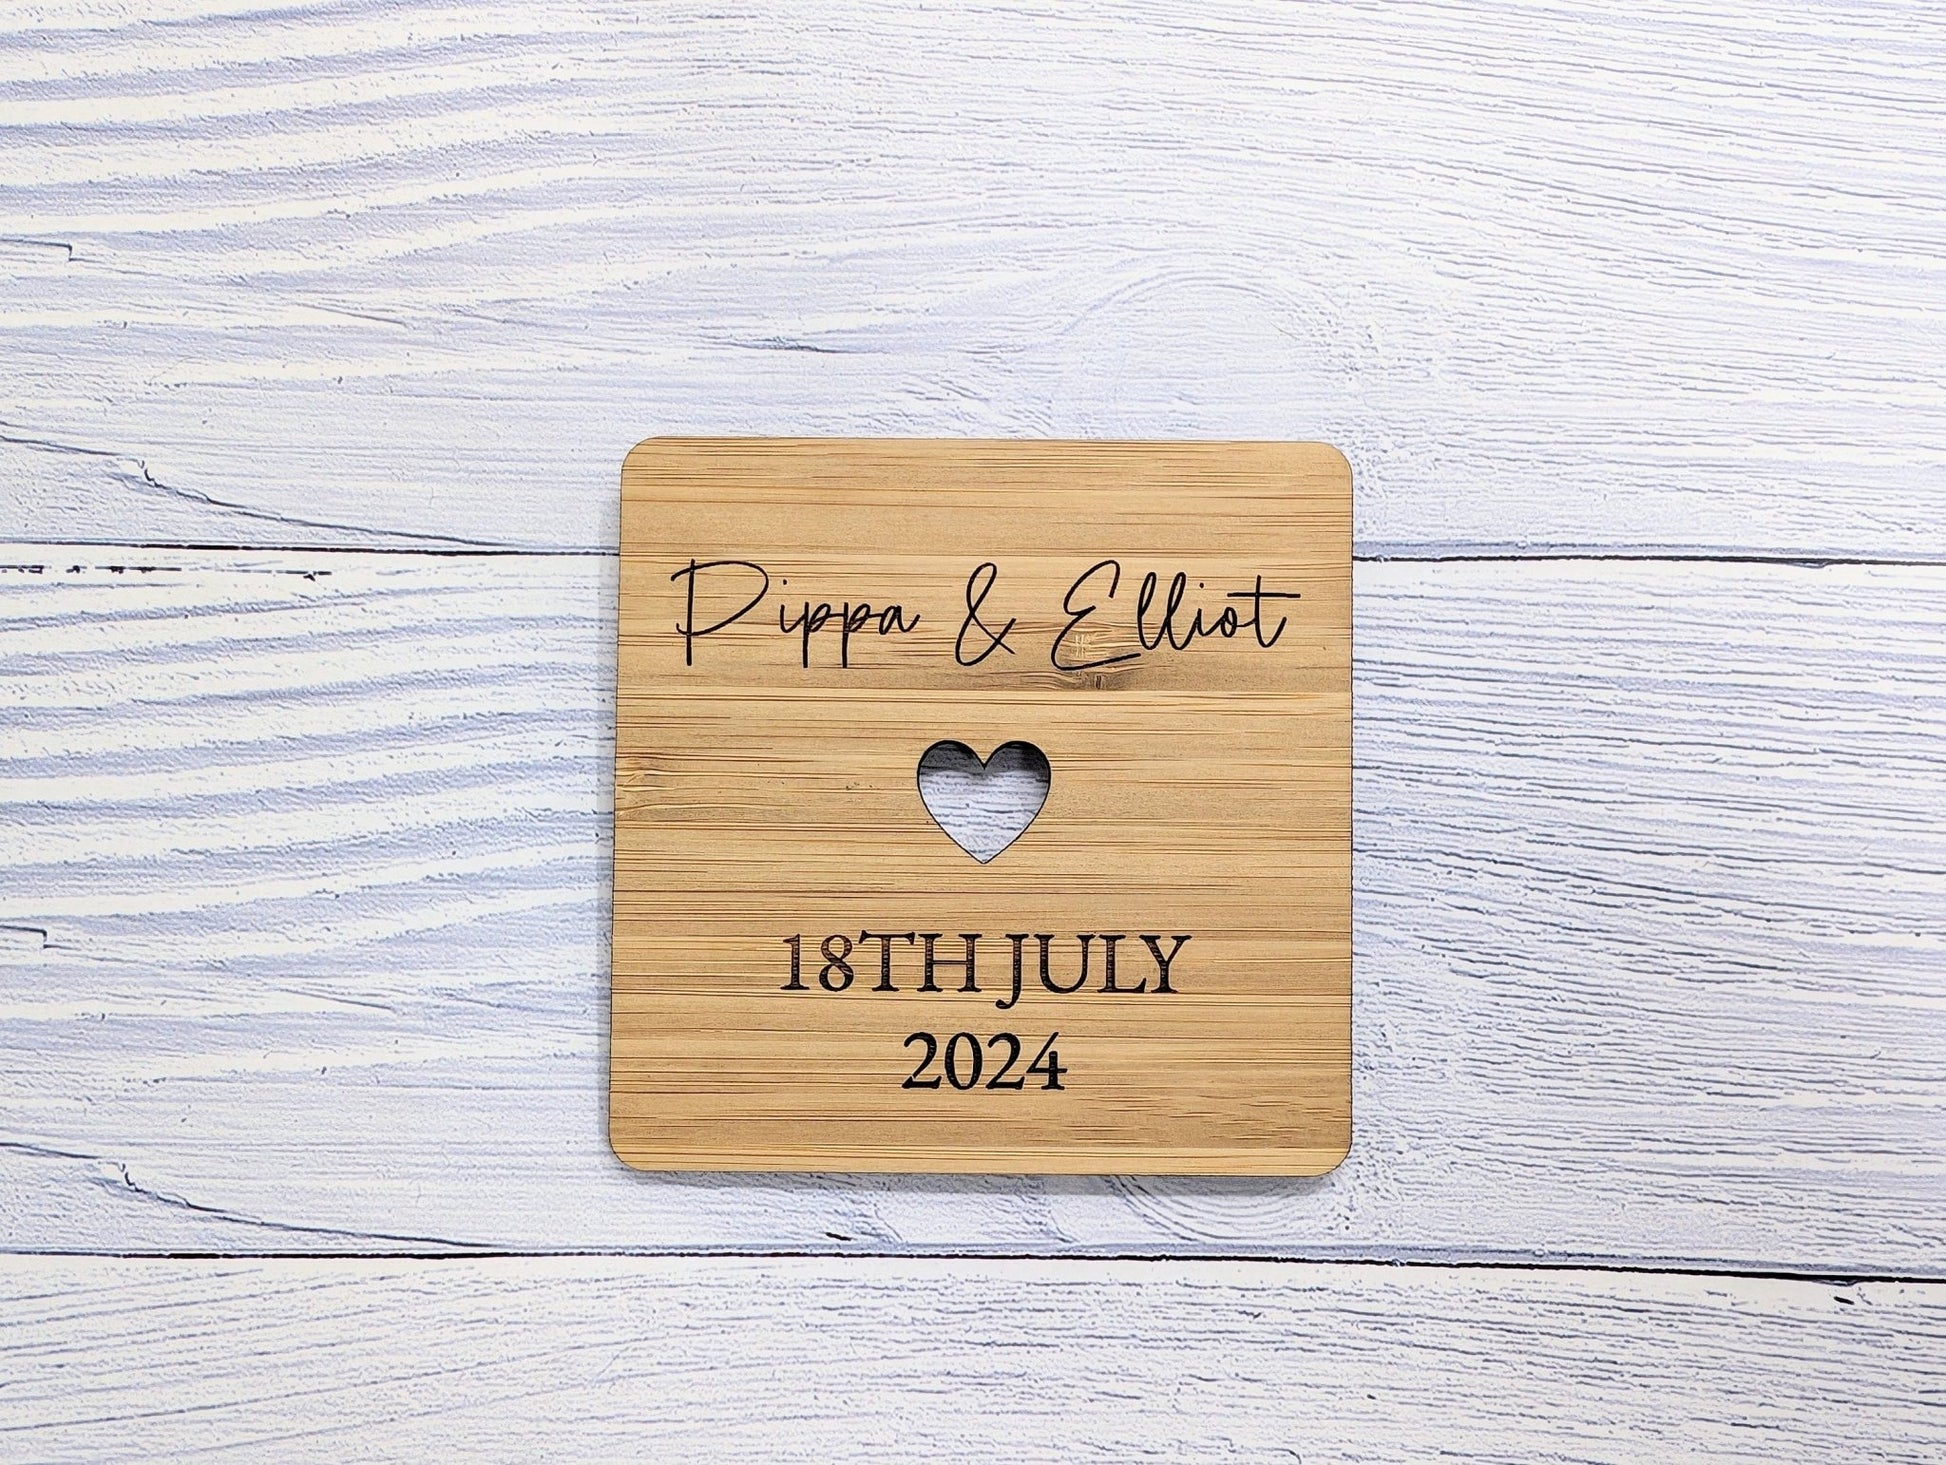 Personalised Bamboo Wedding Coasters - Customizable with Names, Date & Heart Design, 90mm x 90mm, Unique Wedding Favors - CherryGroveCraft